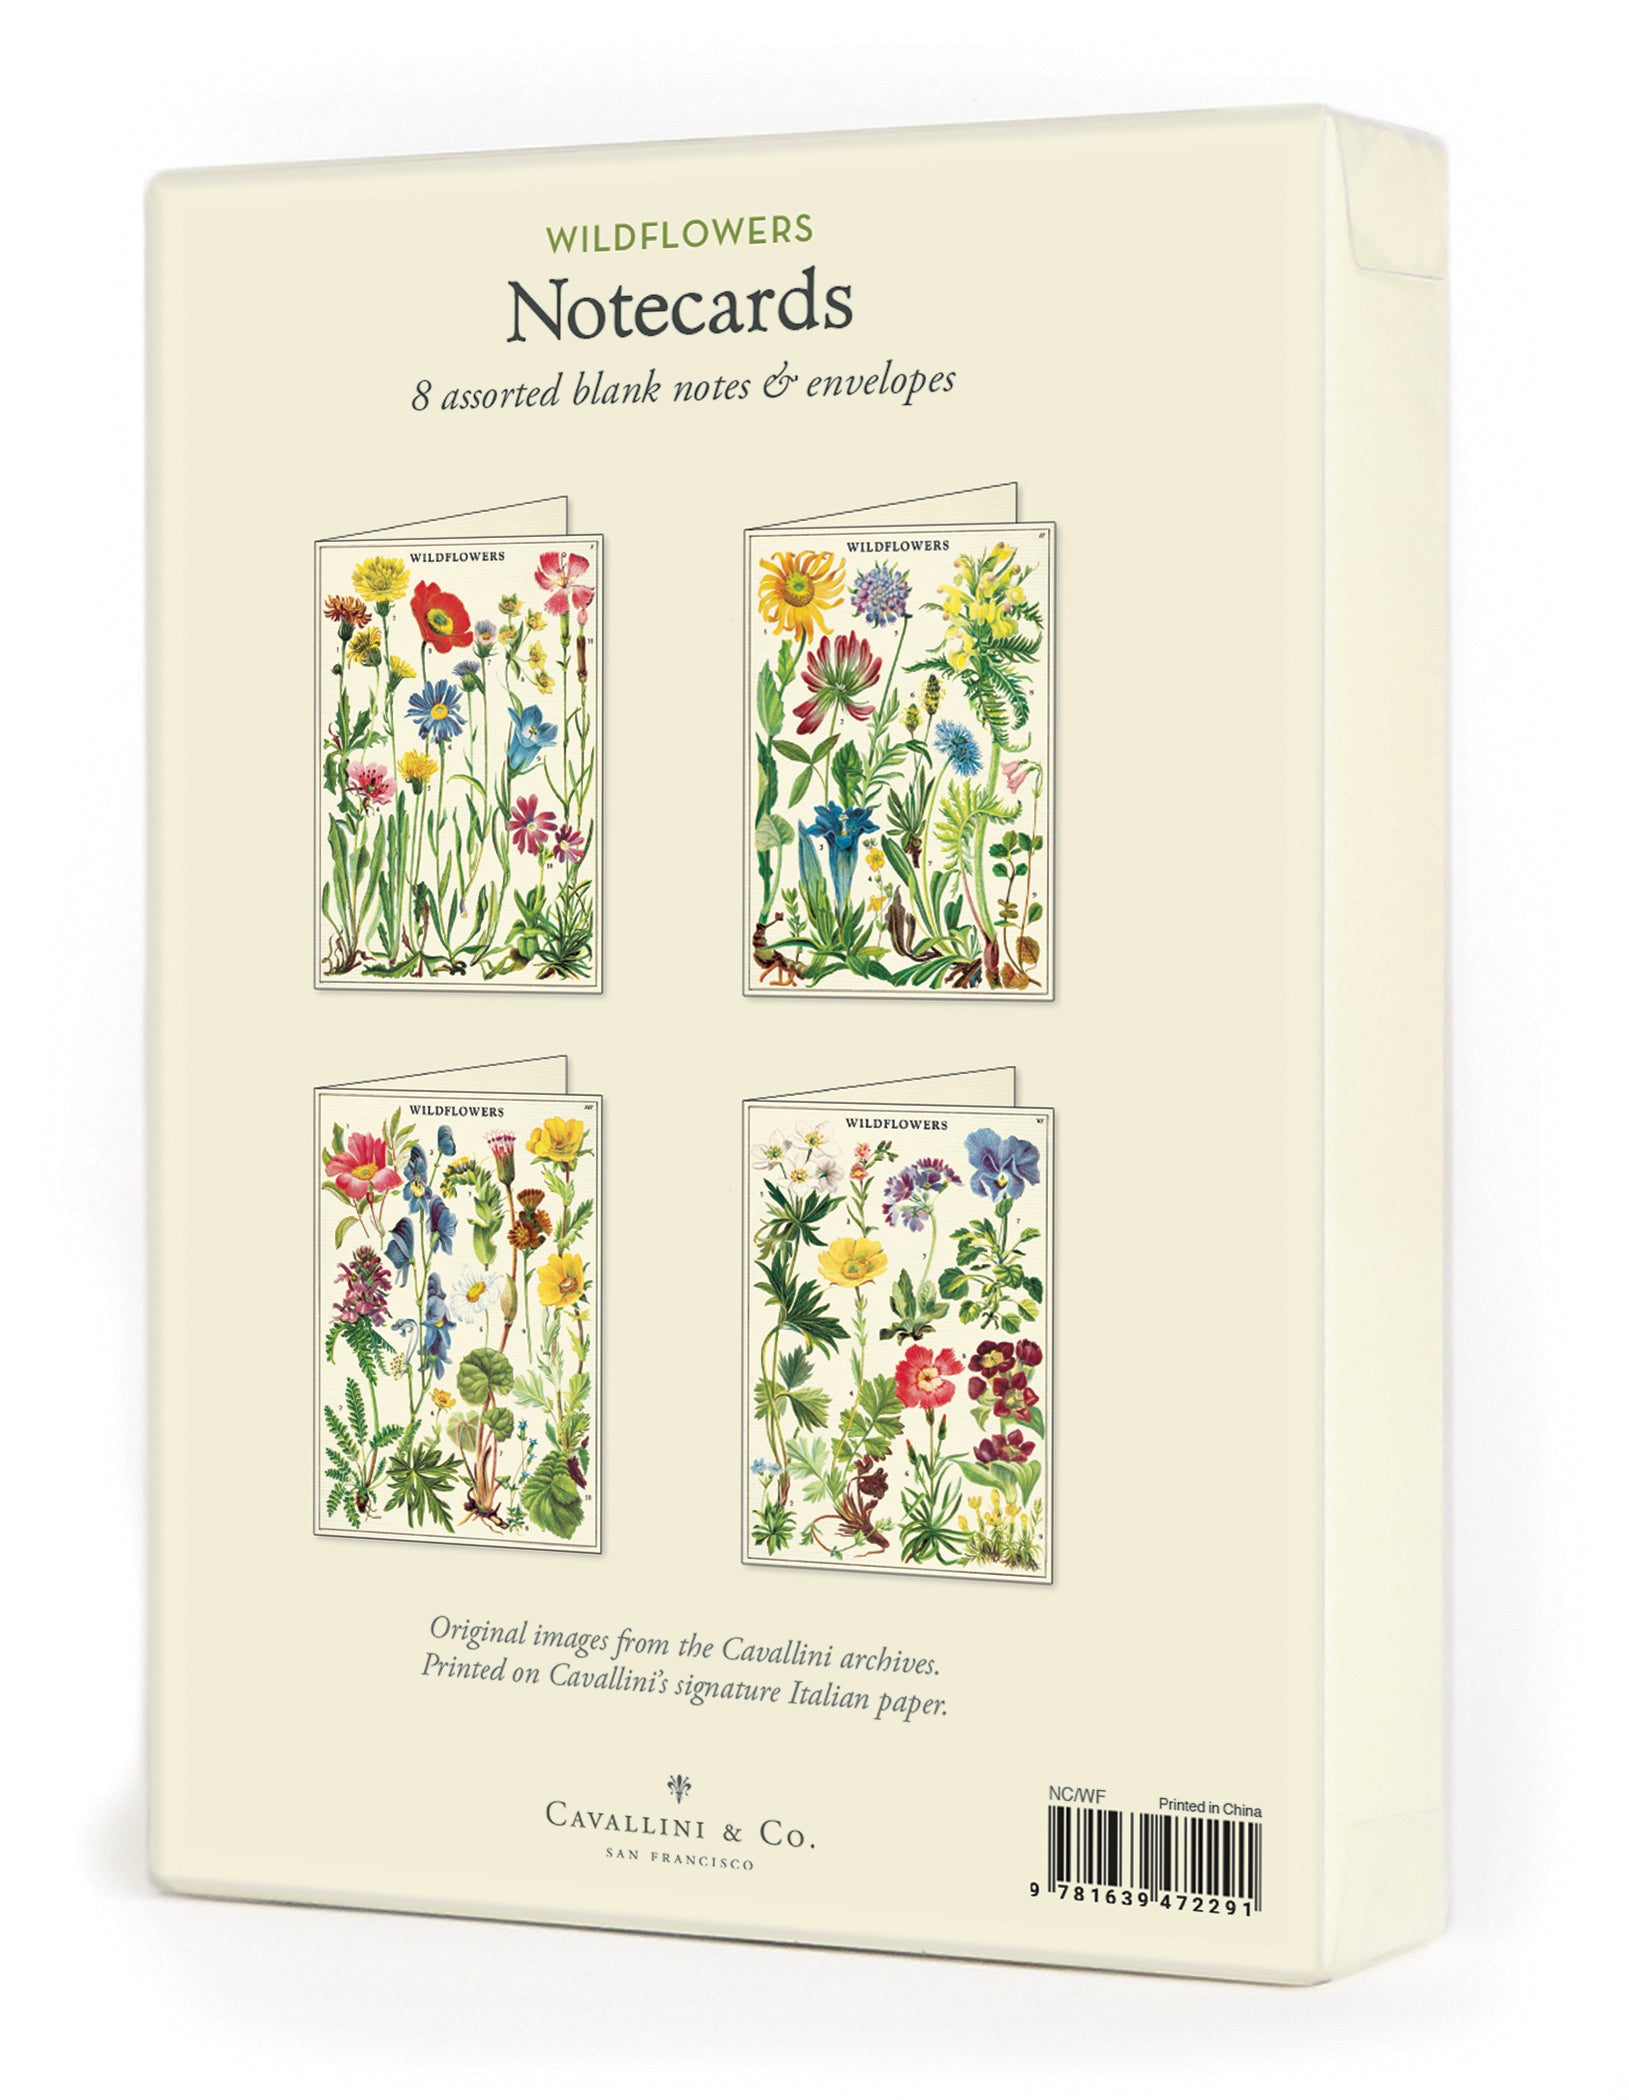 Cavallini & Co's. Wildflowers Boxed Notecard set features a collection of Cavallini's vintage wildflower images. 